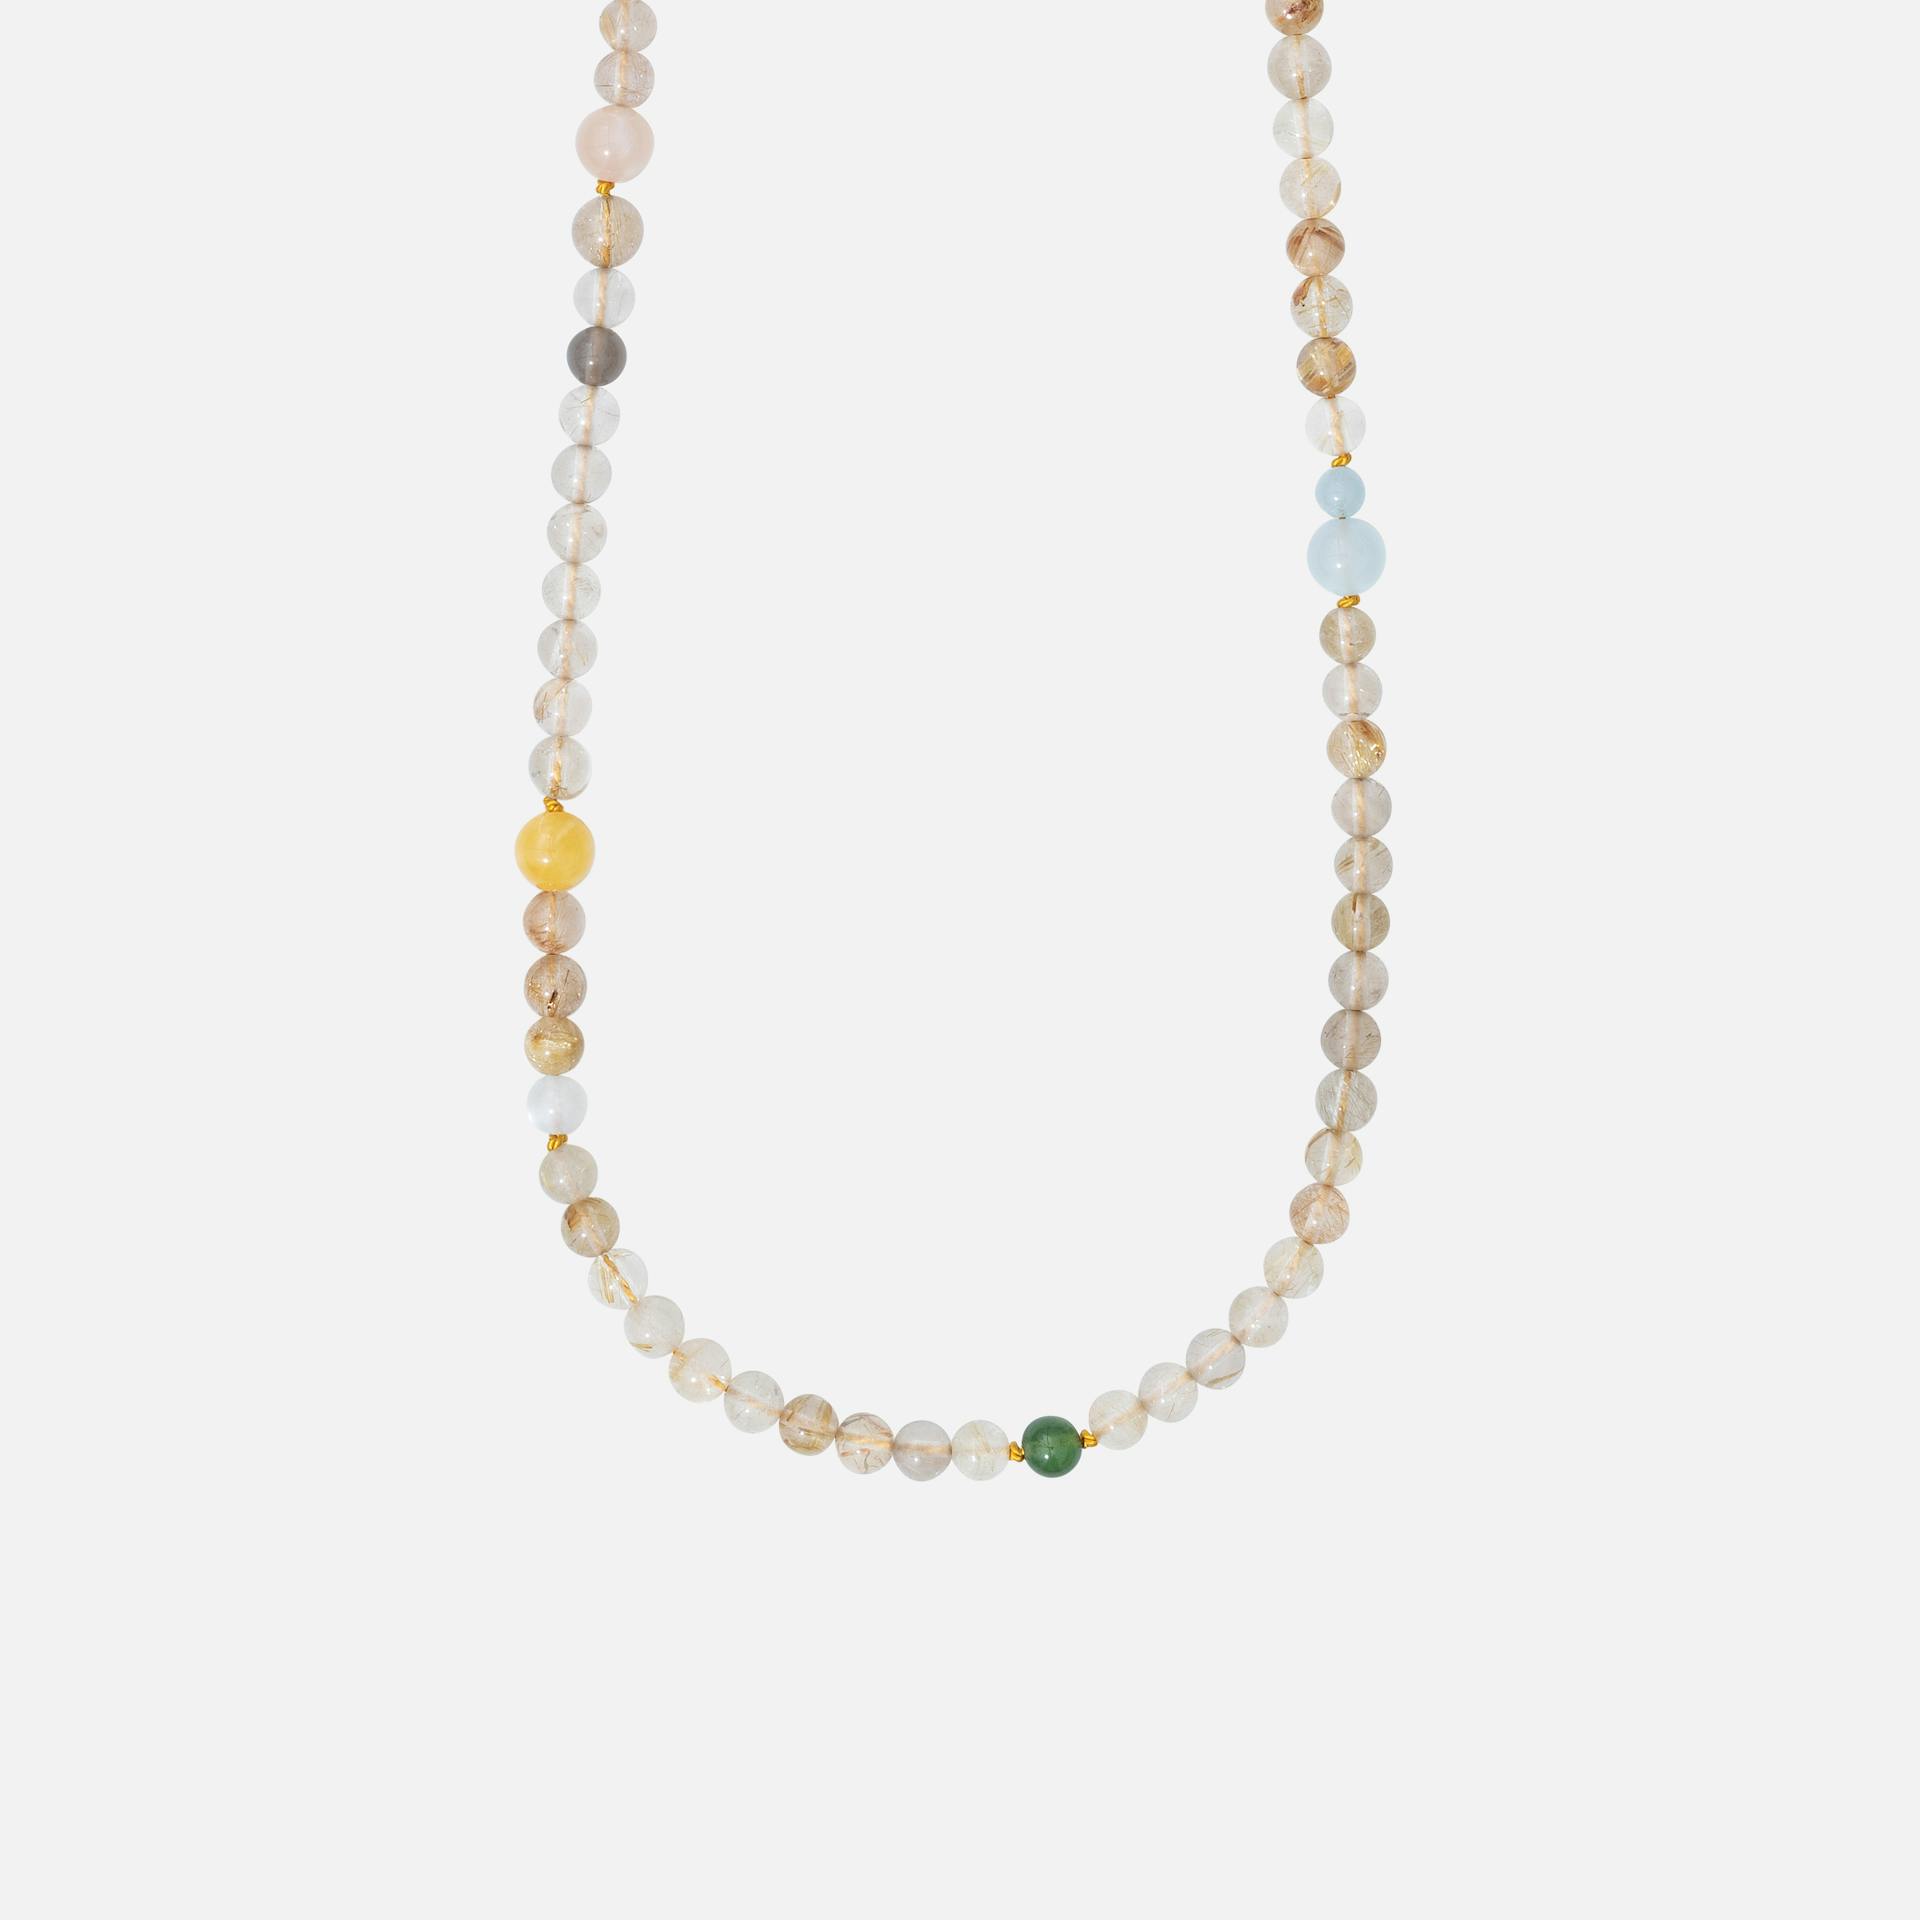 Pearl and Bead Collier Without Lock  |  Ole Lynggaard Copenhagen    